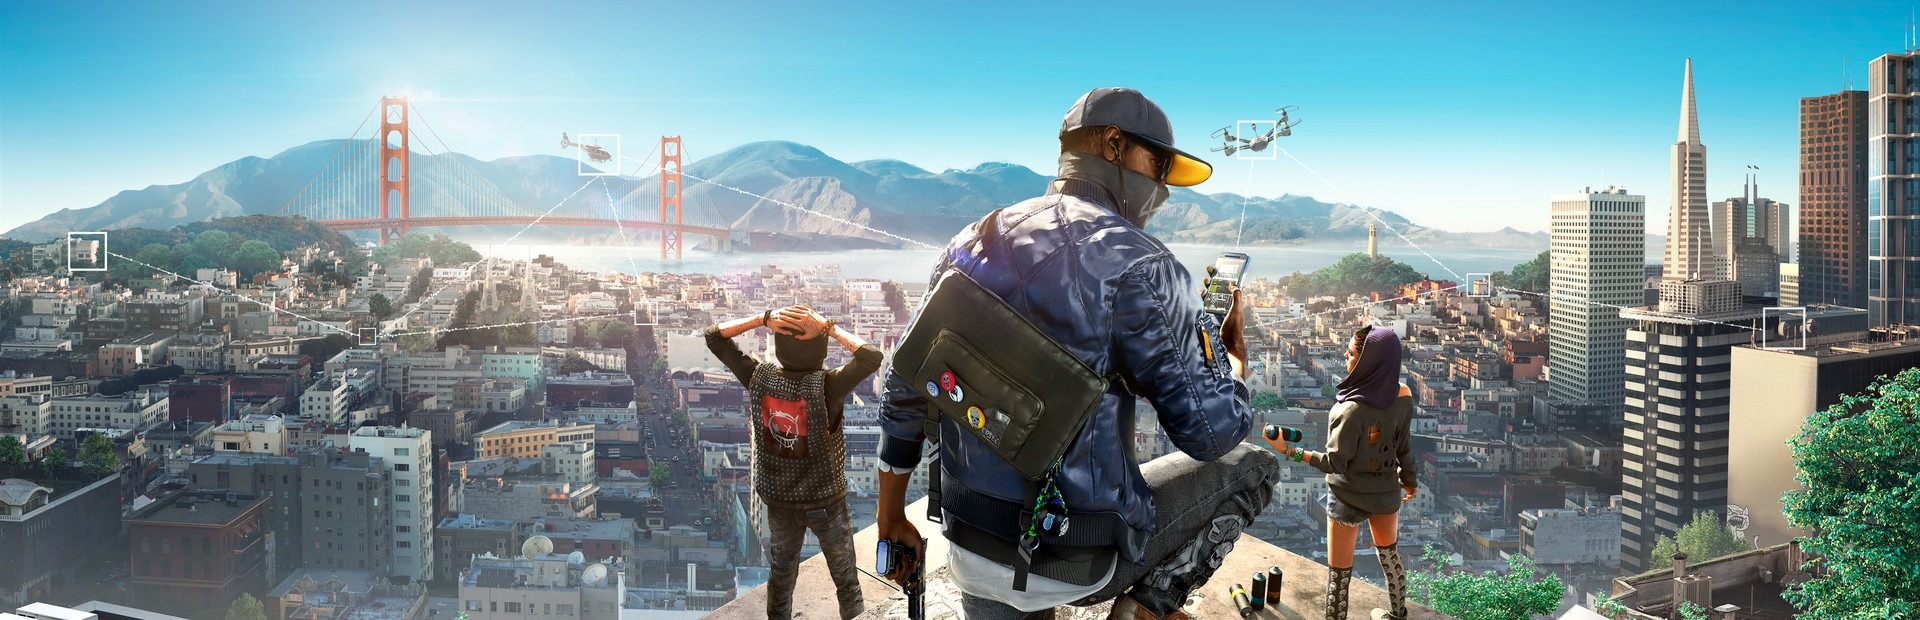 Watch Dogs 2 - Gold Edition (Xbox ONE / Xbox Series X|S)